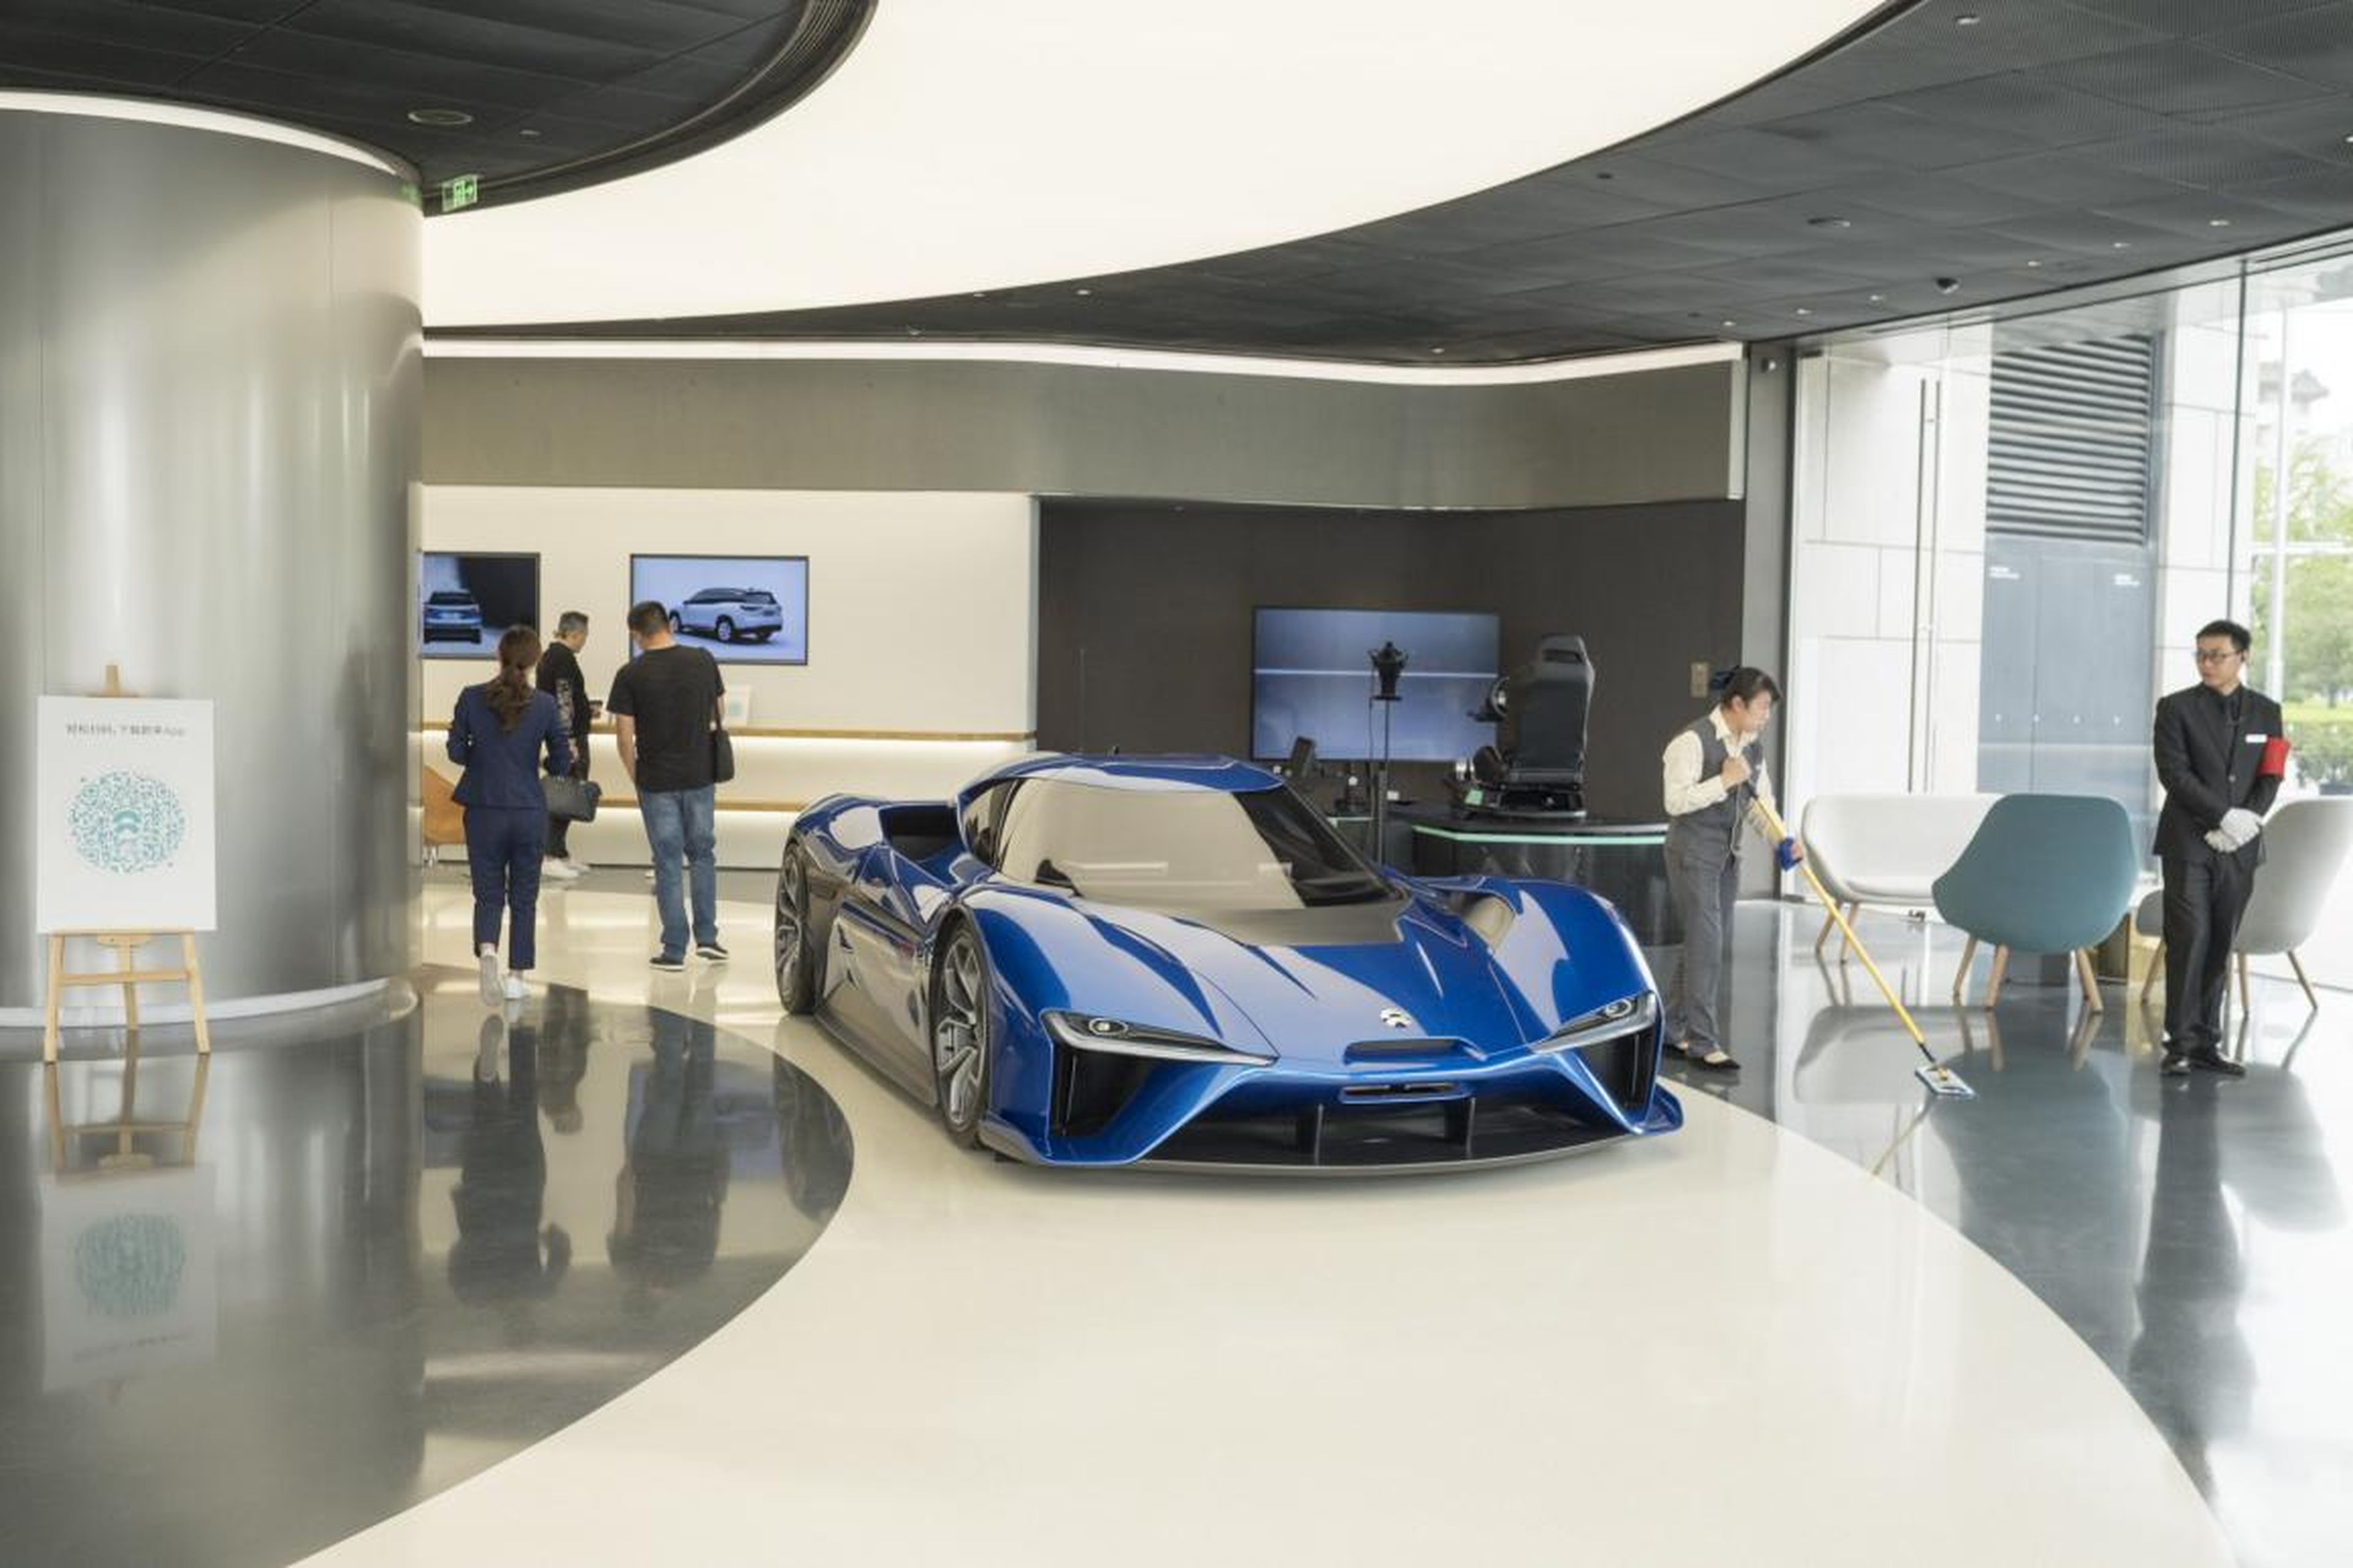 The bottom floor of the Nio House looks like a pared-down car showroom. While the company's ES8 is available to look at, the showstopper is Nio's EP9 supercar, which it says set the record for fastest lap by an electric car at two